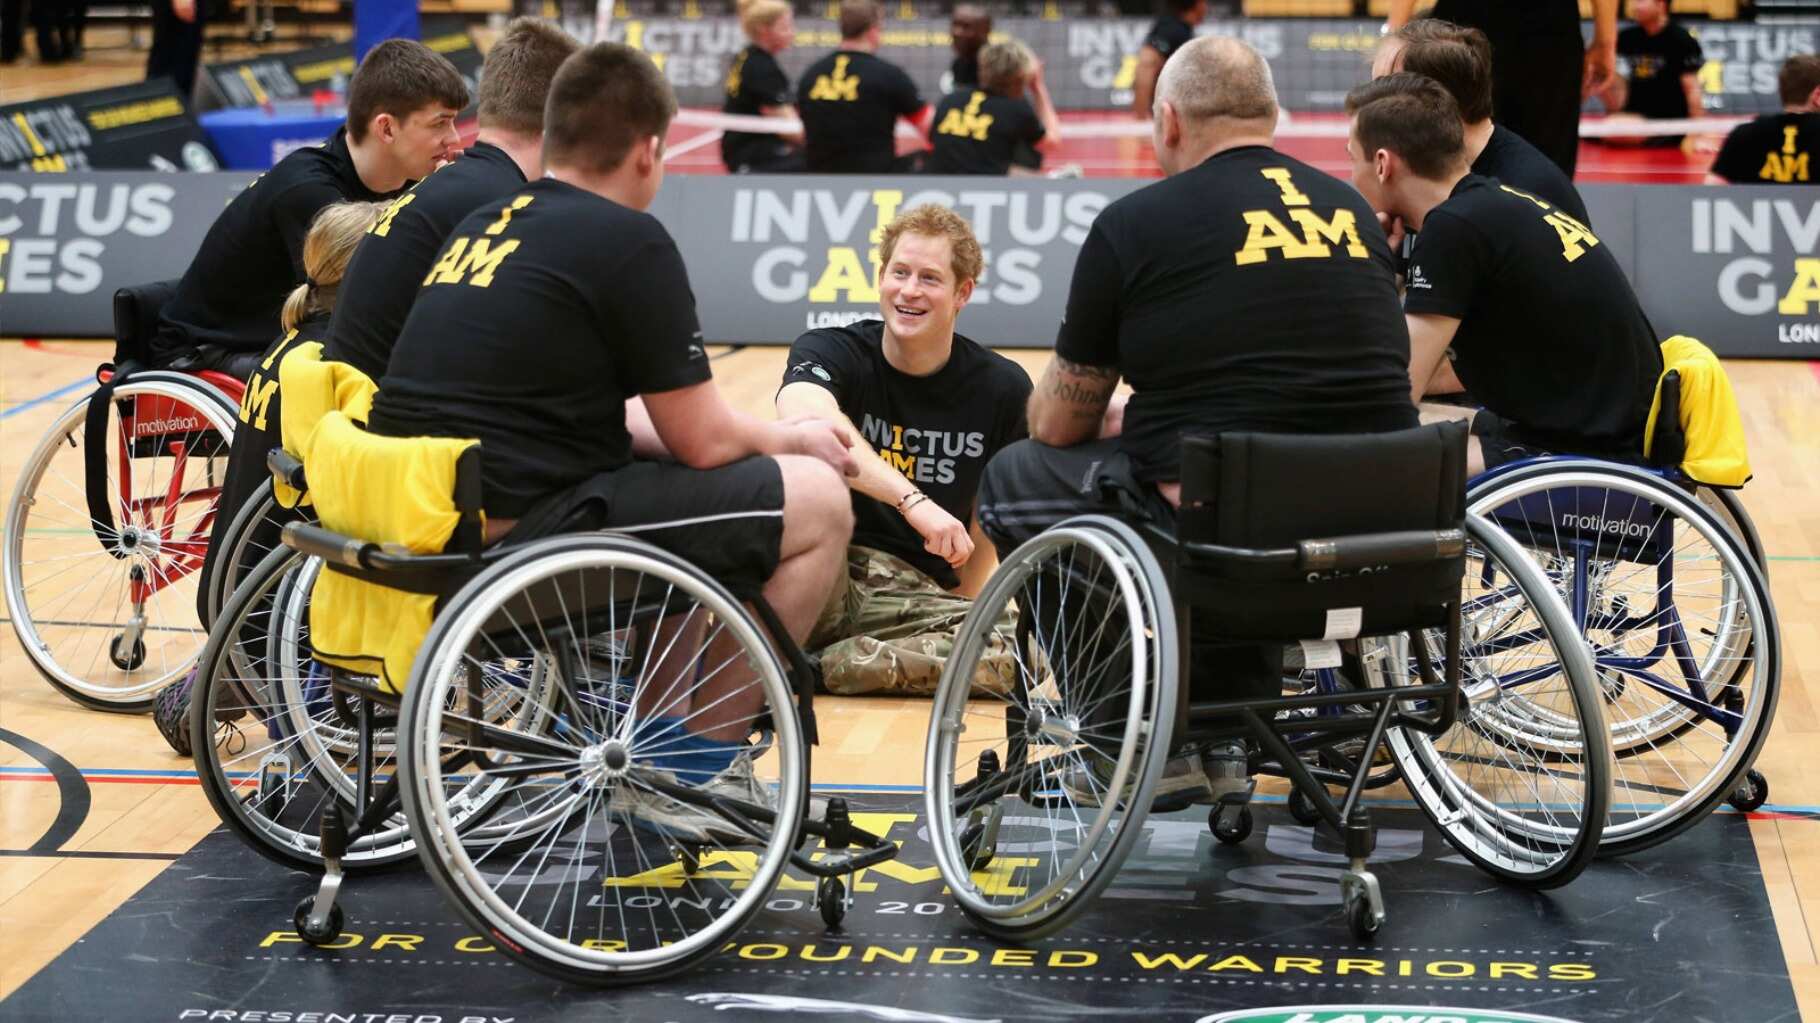 Let the Games Begin - Invictus Games: the sporting event presented by Land Rover 